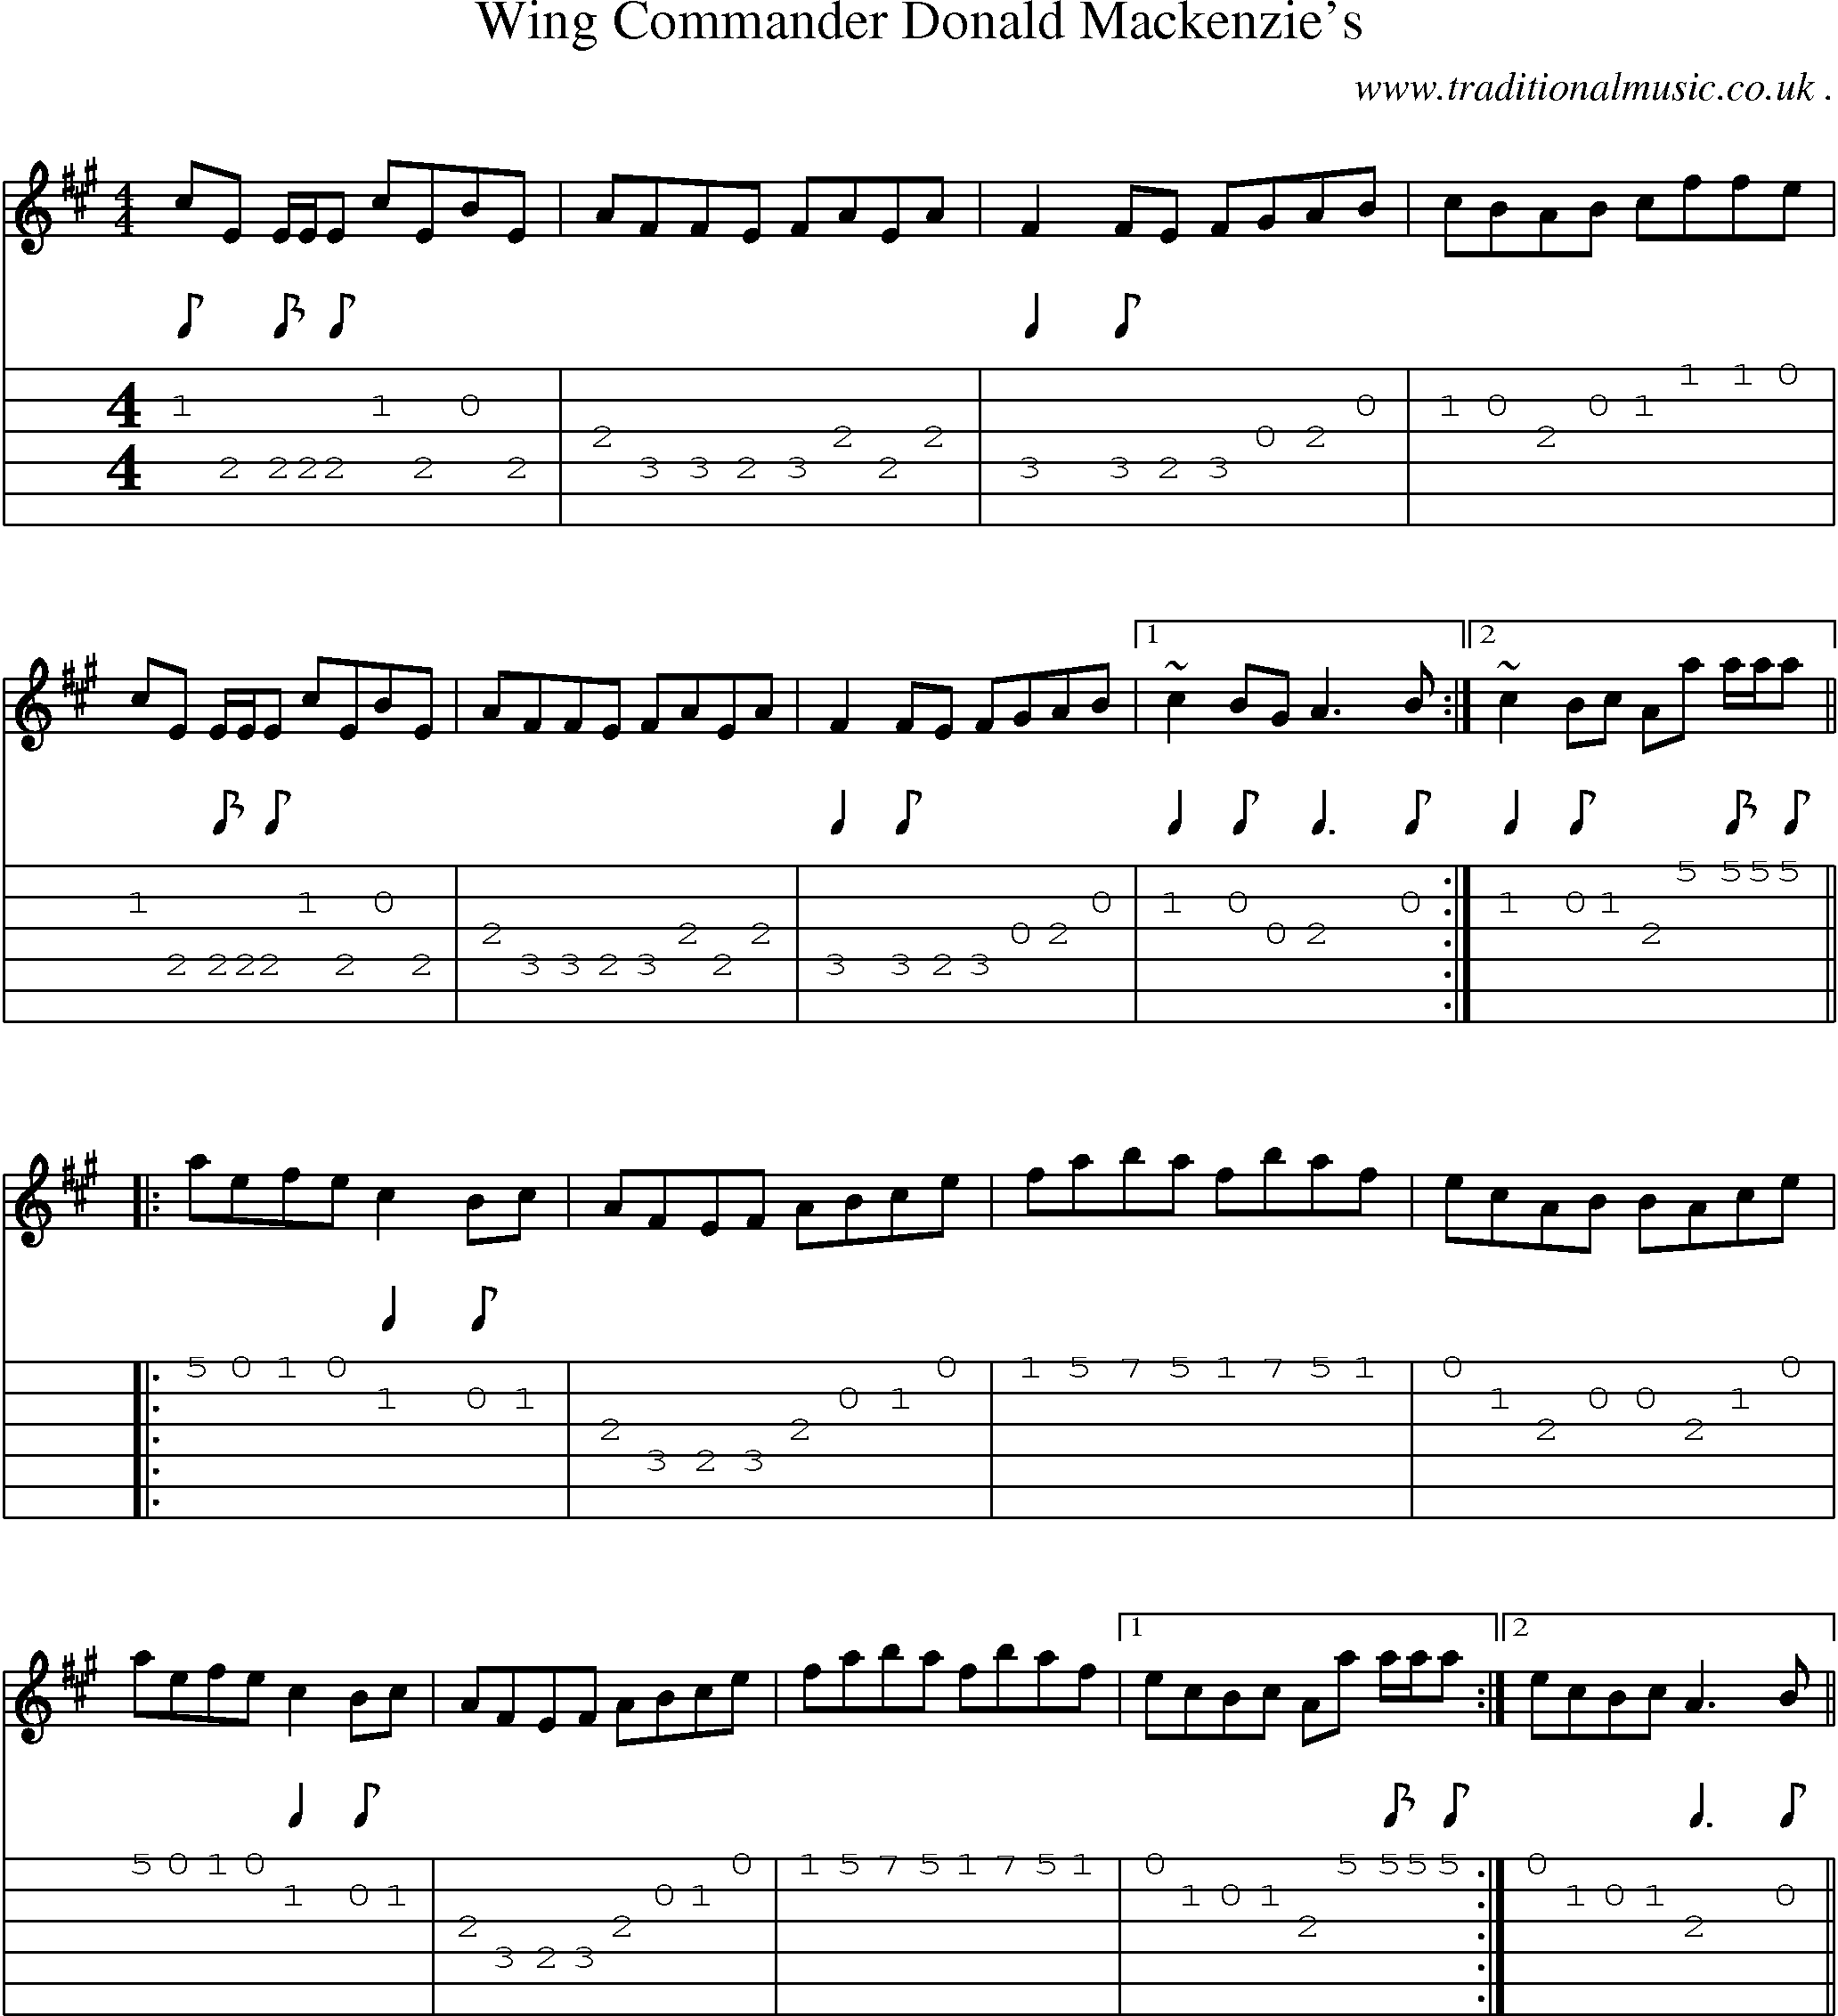 Sheet-music  score, Chords and Guitar Tabs for Wing Commander Donald Mackenzies